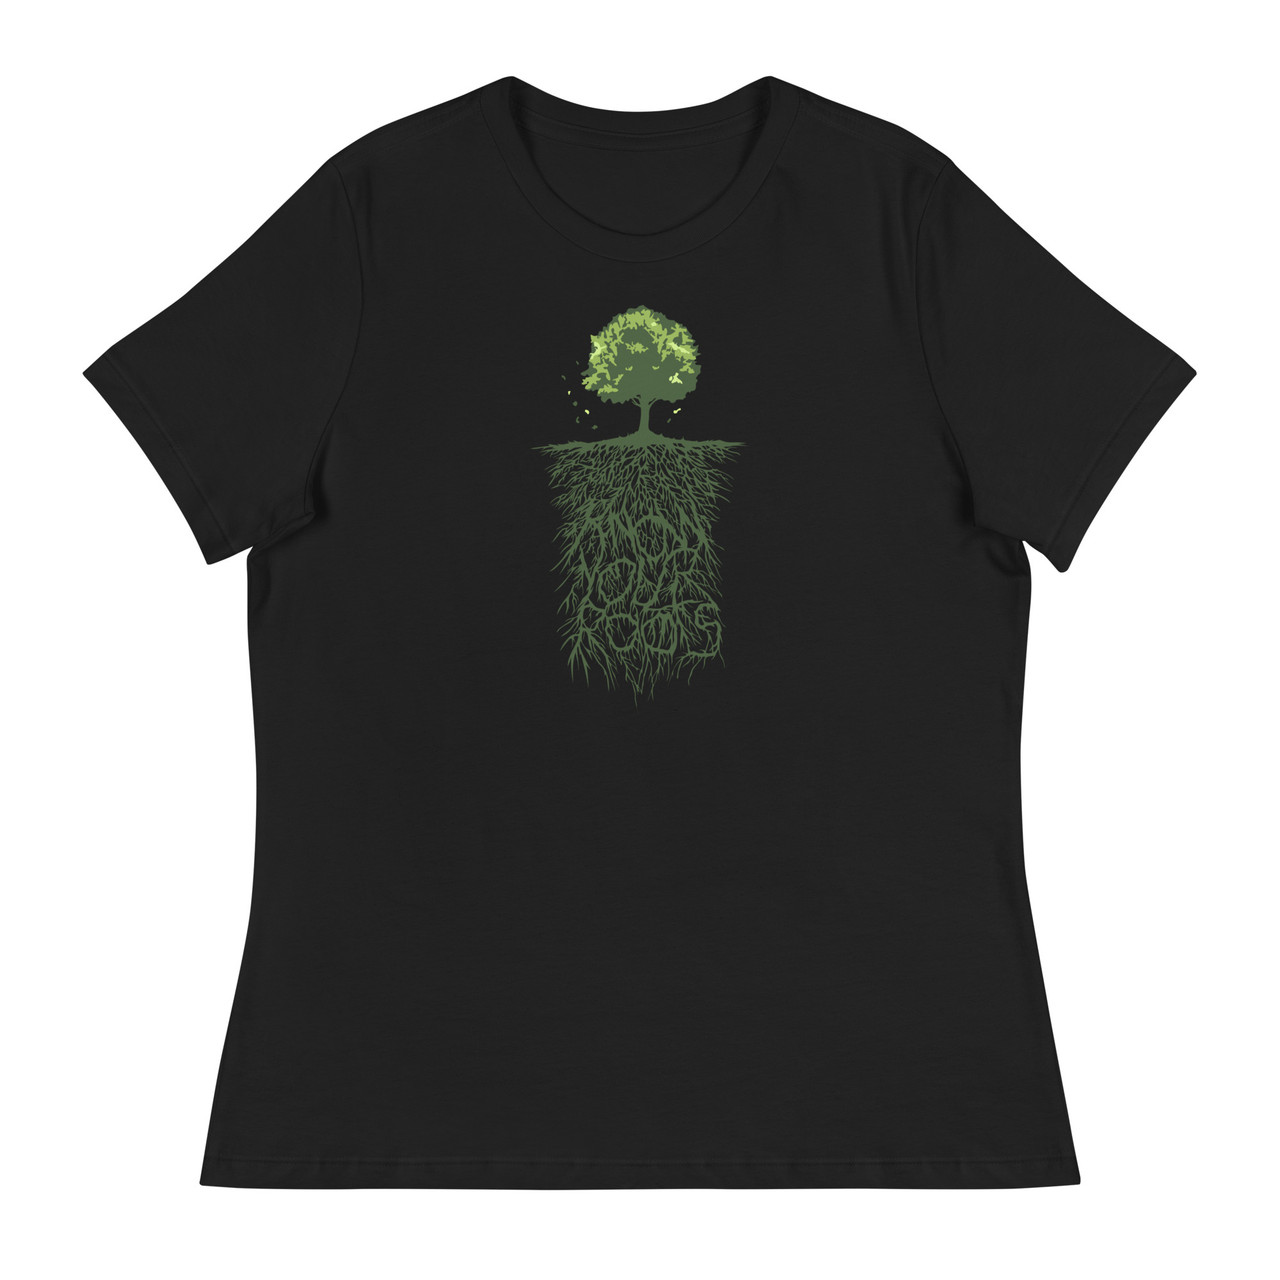 Know Your Roots Women's Relaxed T-Shirt - Bella + Canvas 6400 